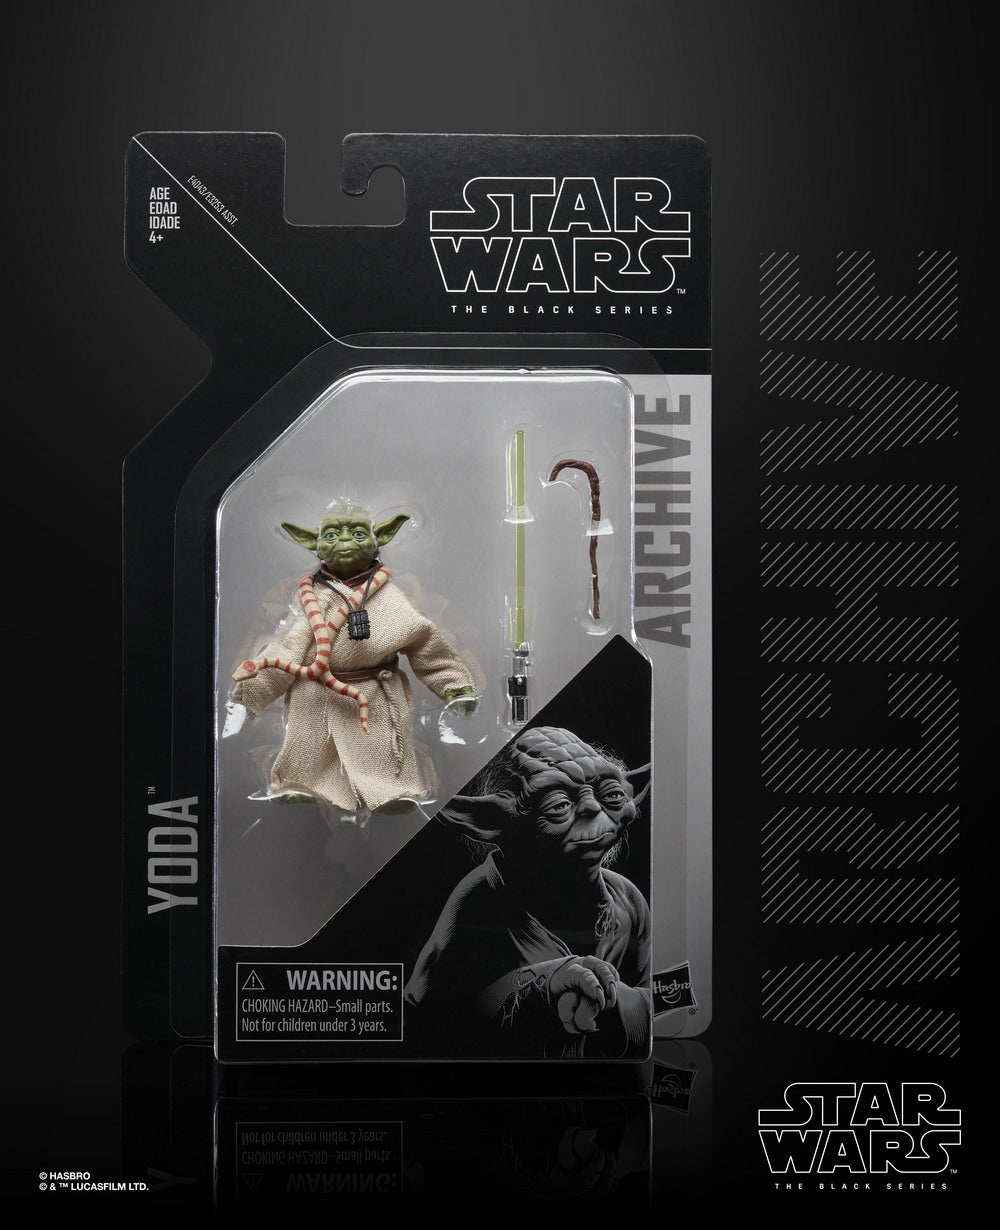 STAR WARS THE BLACK SERIES ARCHIVE 6-INCH Figure Assortment - Yoda (in pck)